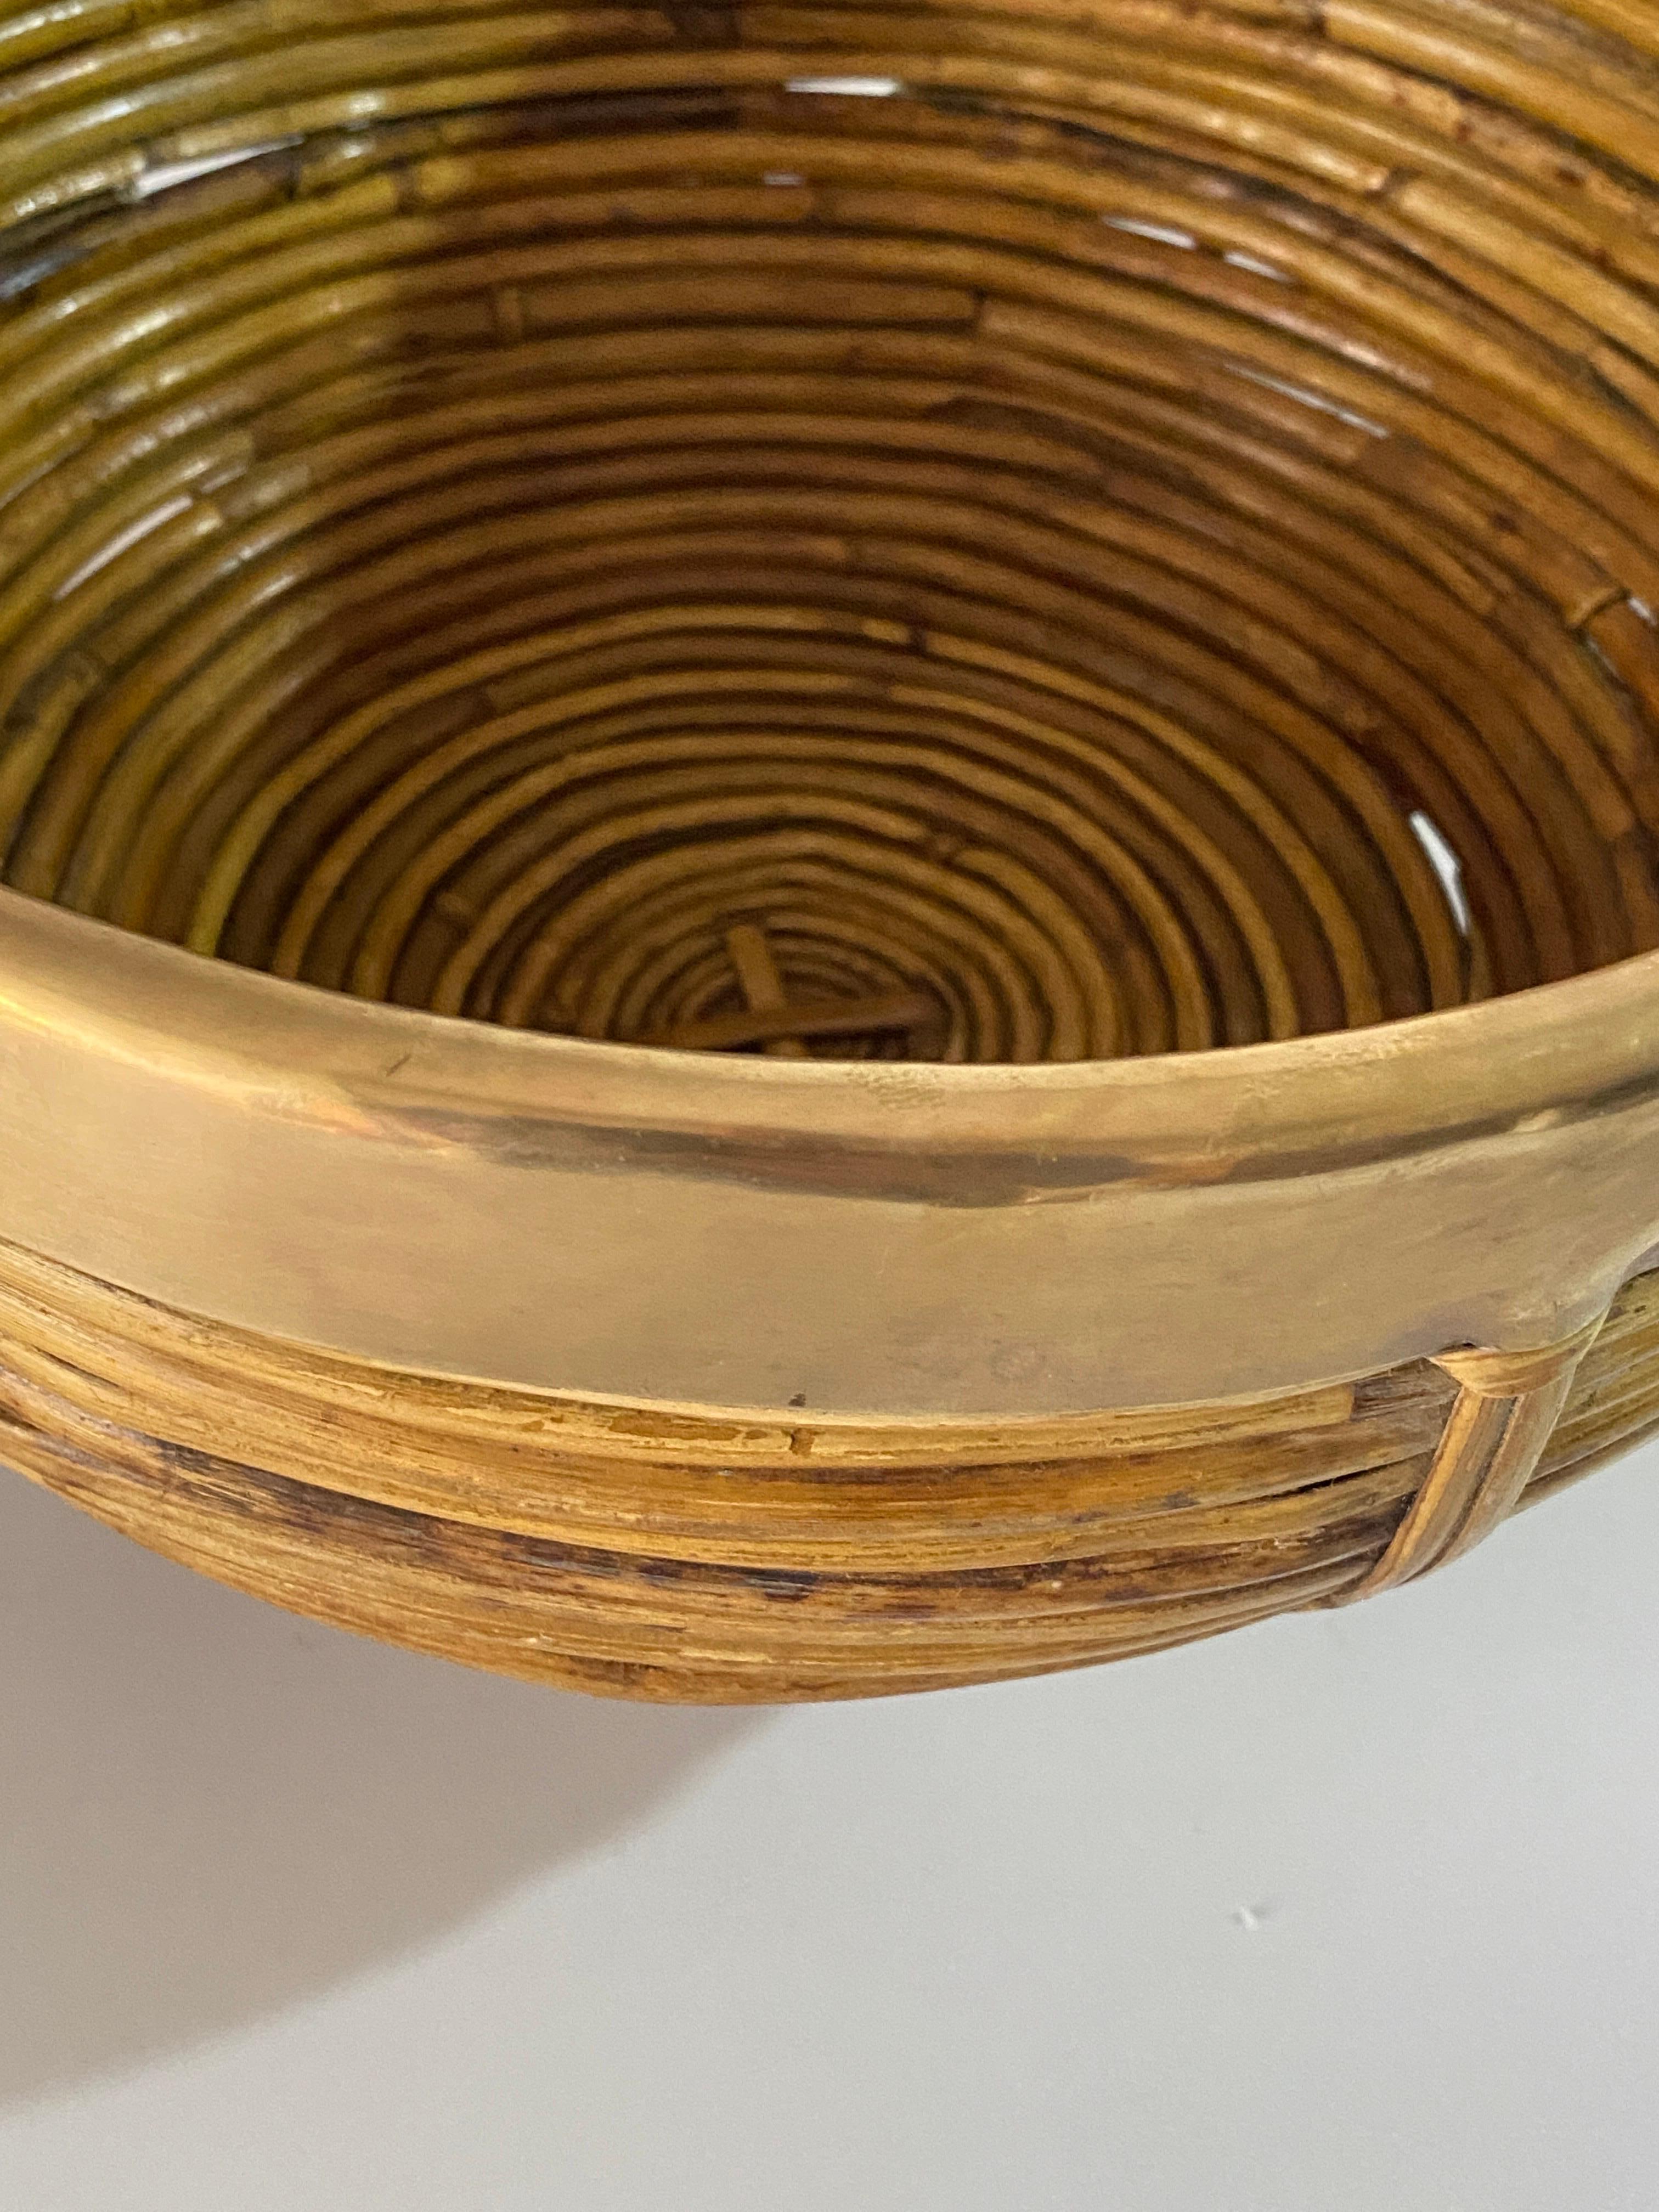 Mid-Century Modern brass and bamboo / rattan large oval bowl, centerpiece or basket.
It has a brass trim covering the top.
Handcrafted in Italy, 1970s. 
Use it as fruit bowl or centerpiece to add a stylish Midcentury accent in a kitchen. Perfect to